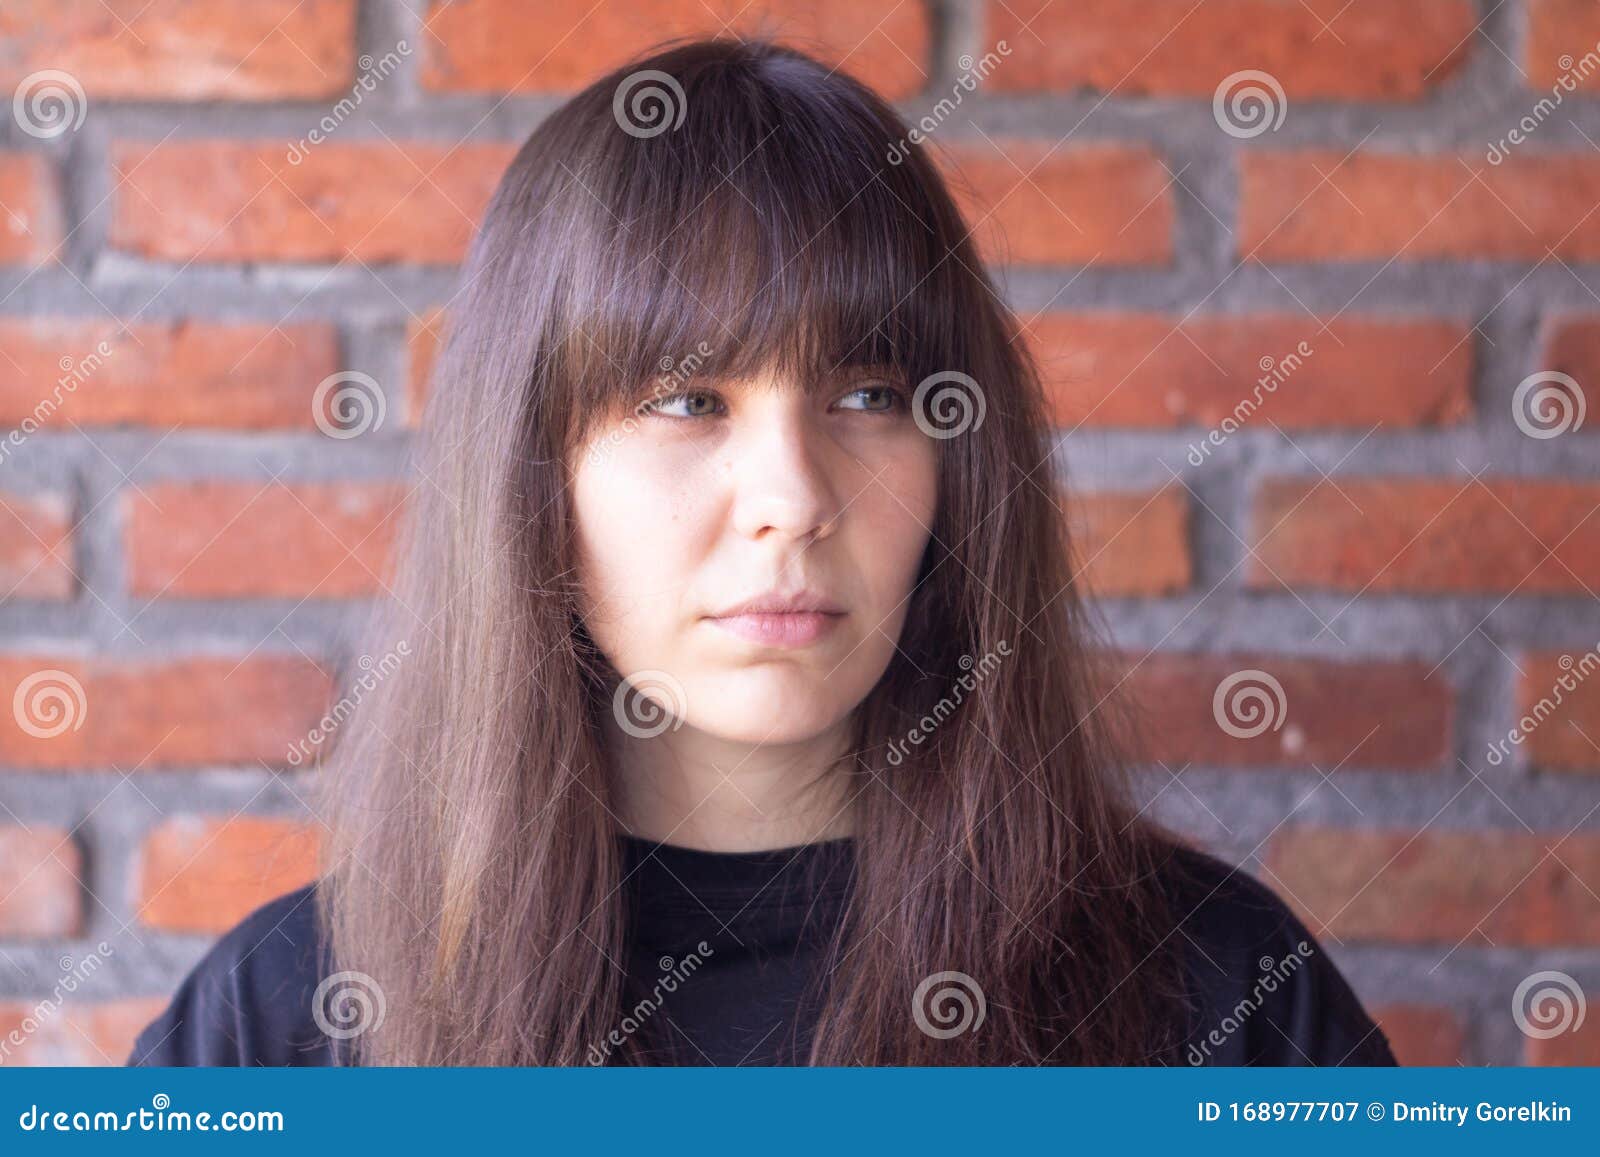 Portrait of a Sad Brunette Woman with Bangs Wearing a Black T-shirt on  Brick Wall Background Stock Image - Image of brunette, facial: 168977707